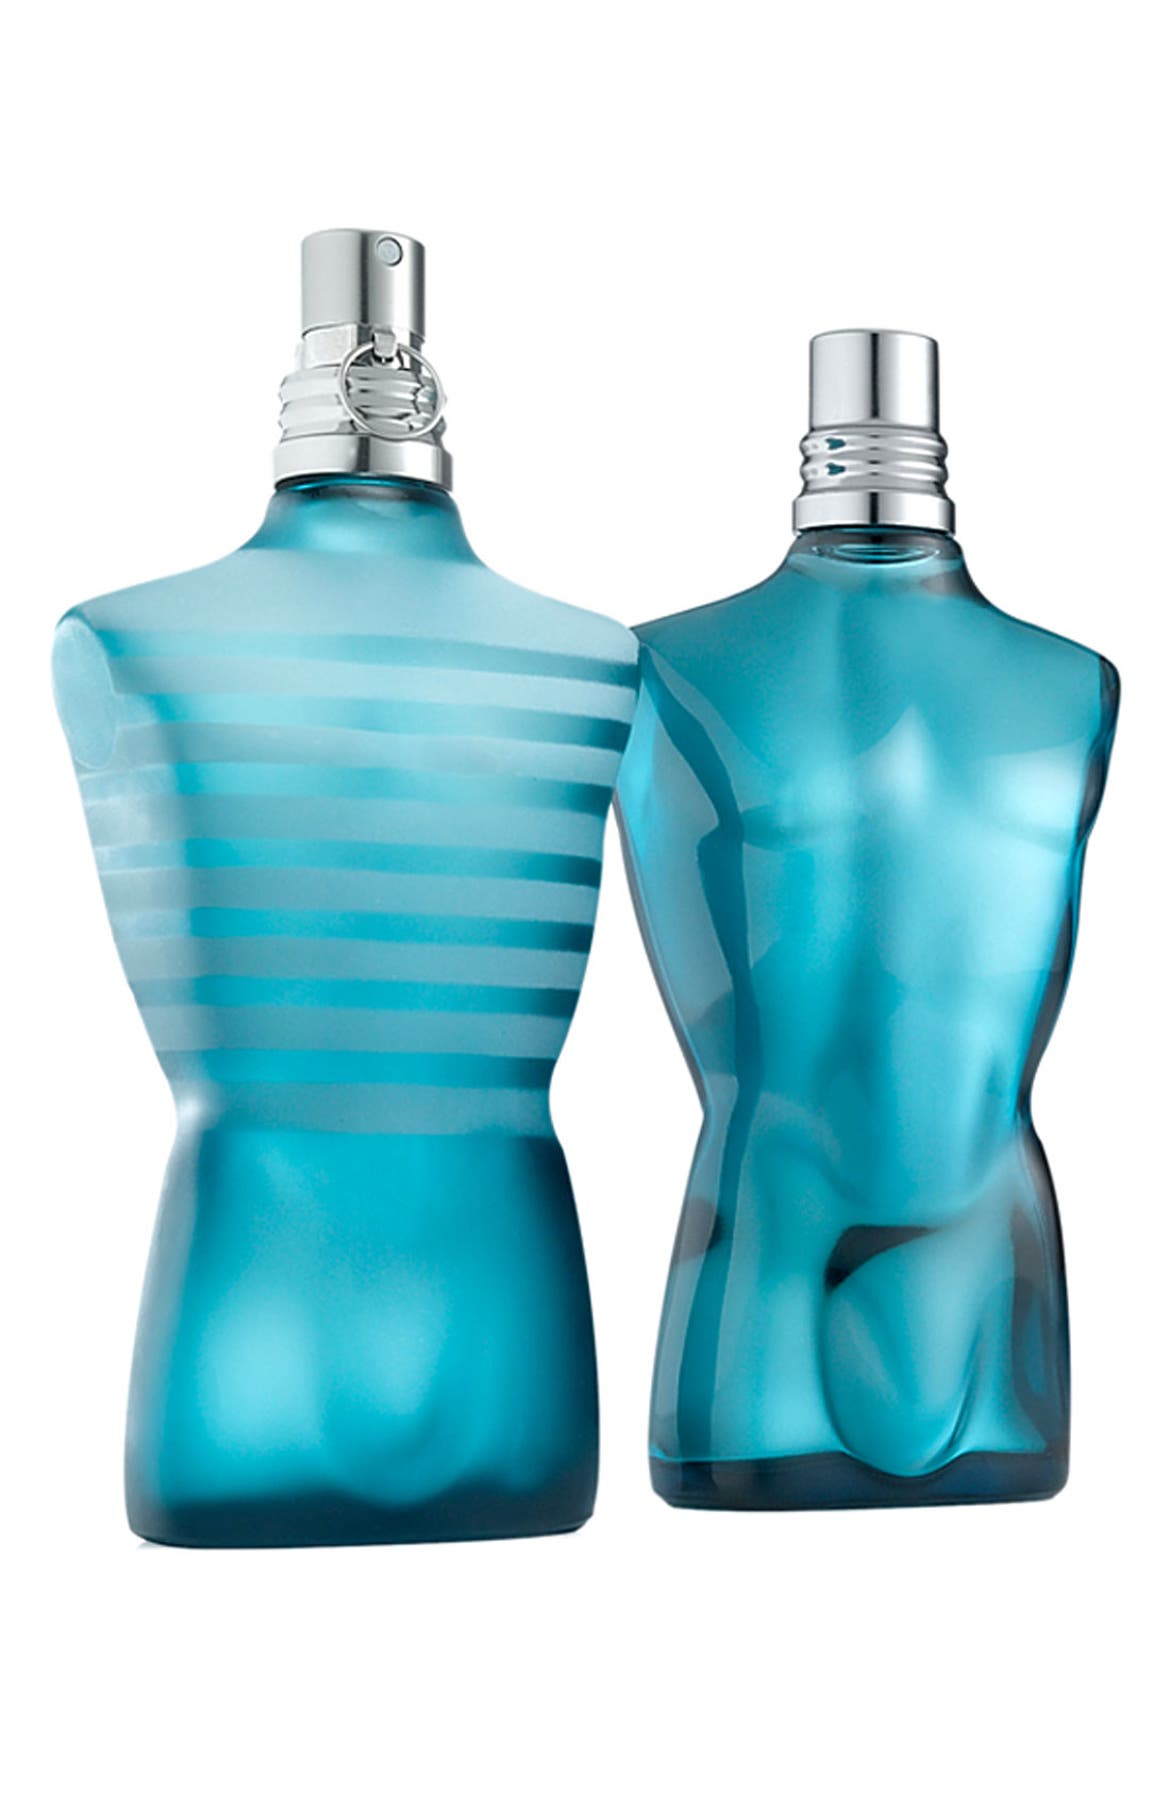 Jean Paul Gaultier 'Le Male' Holiday Set ($131 Value) | Nordstrom